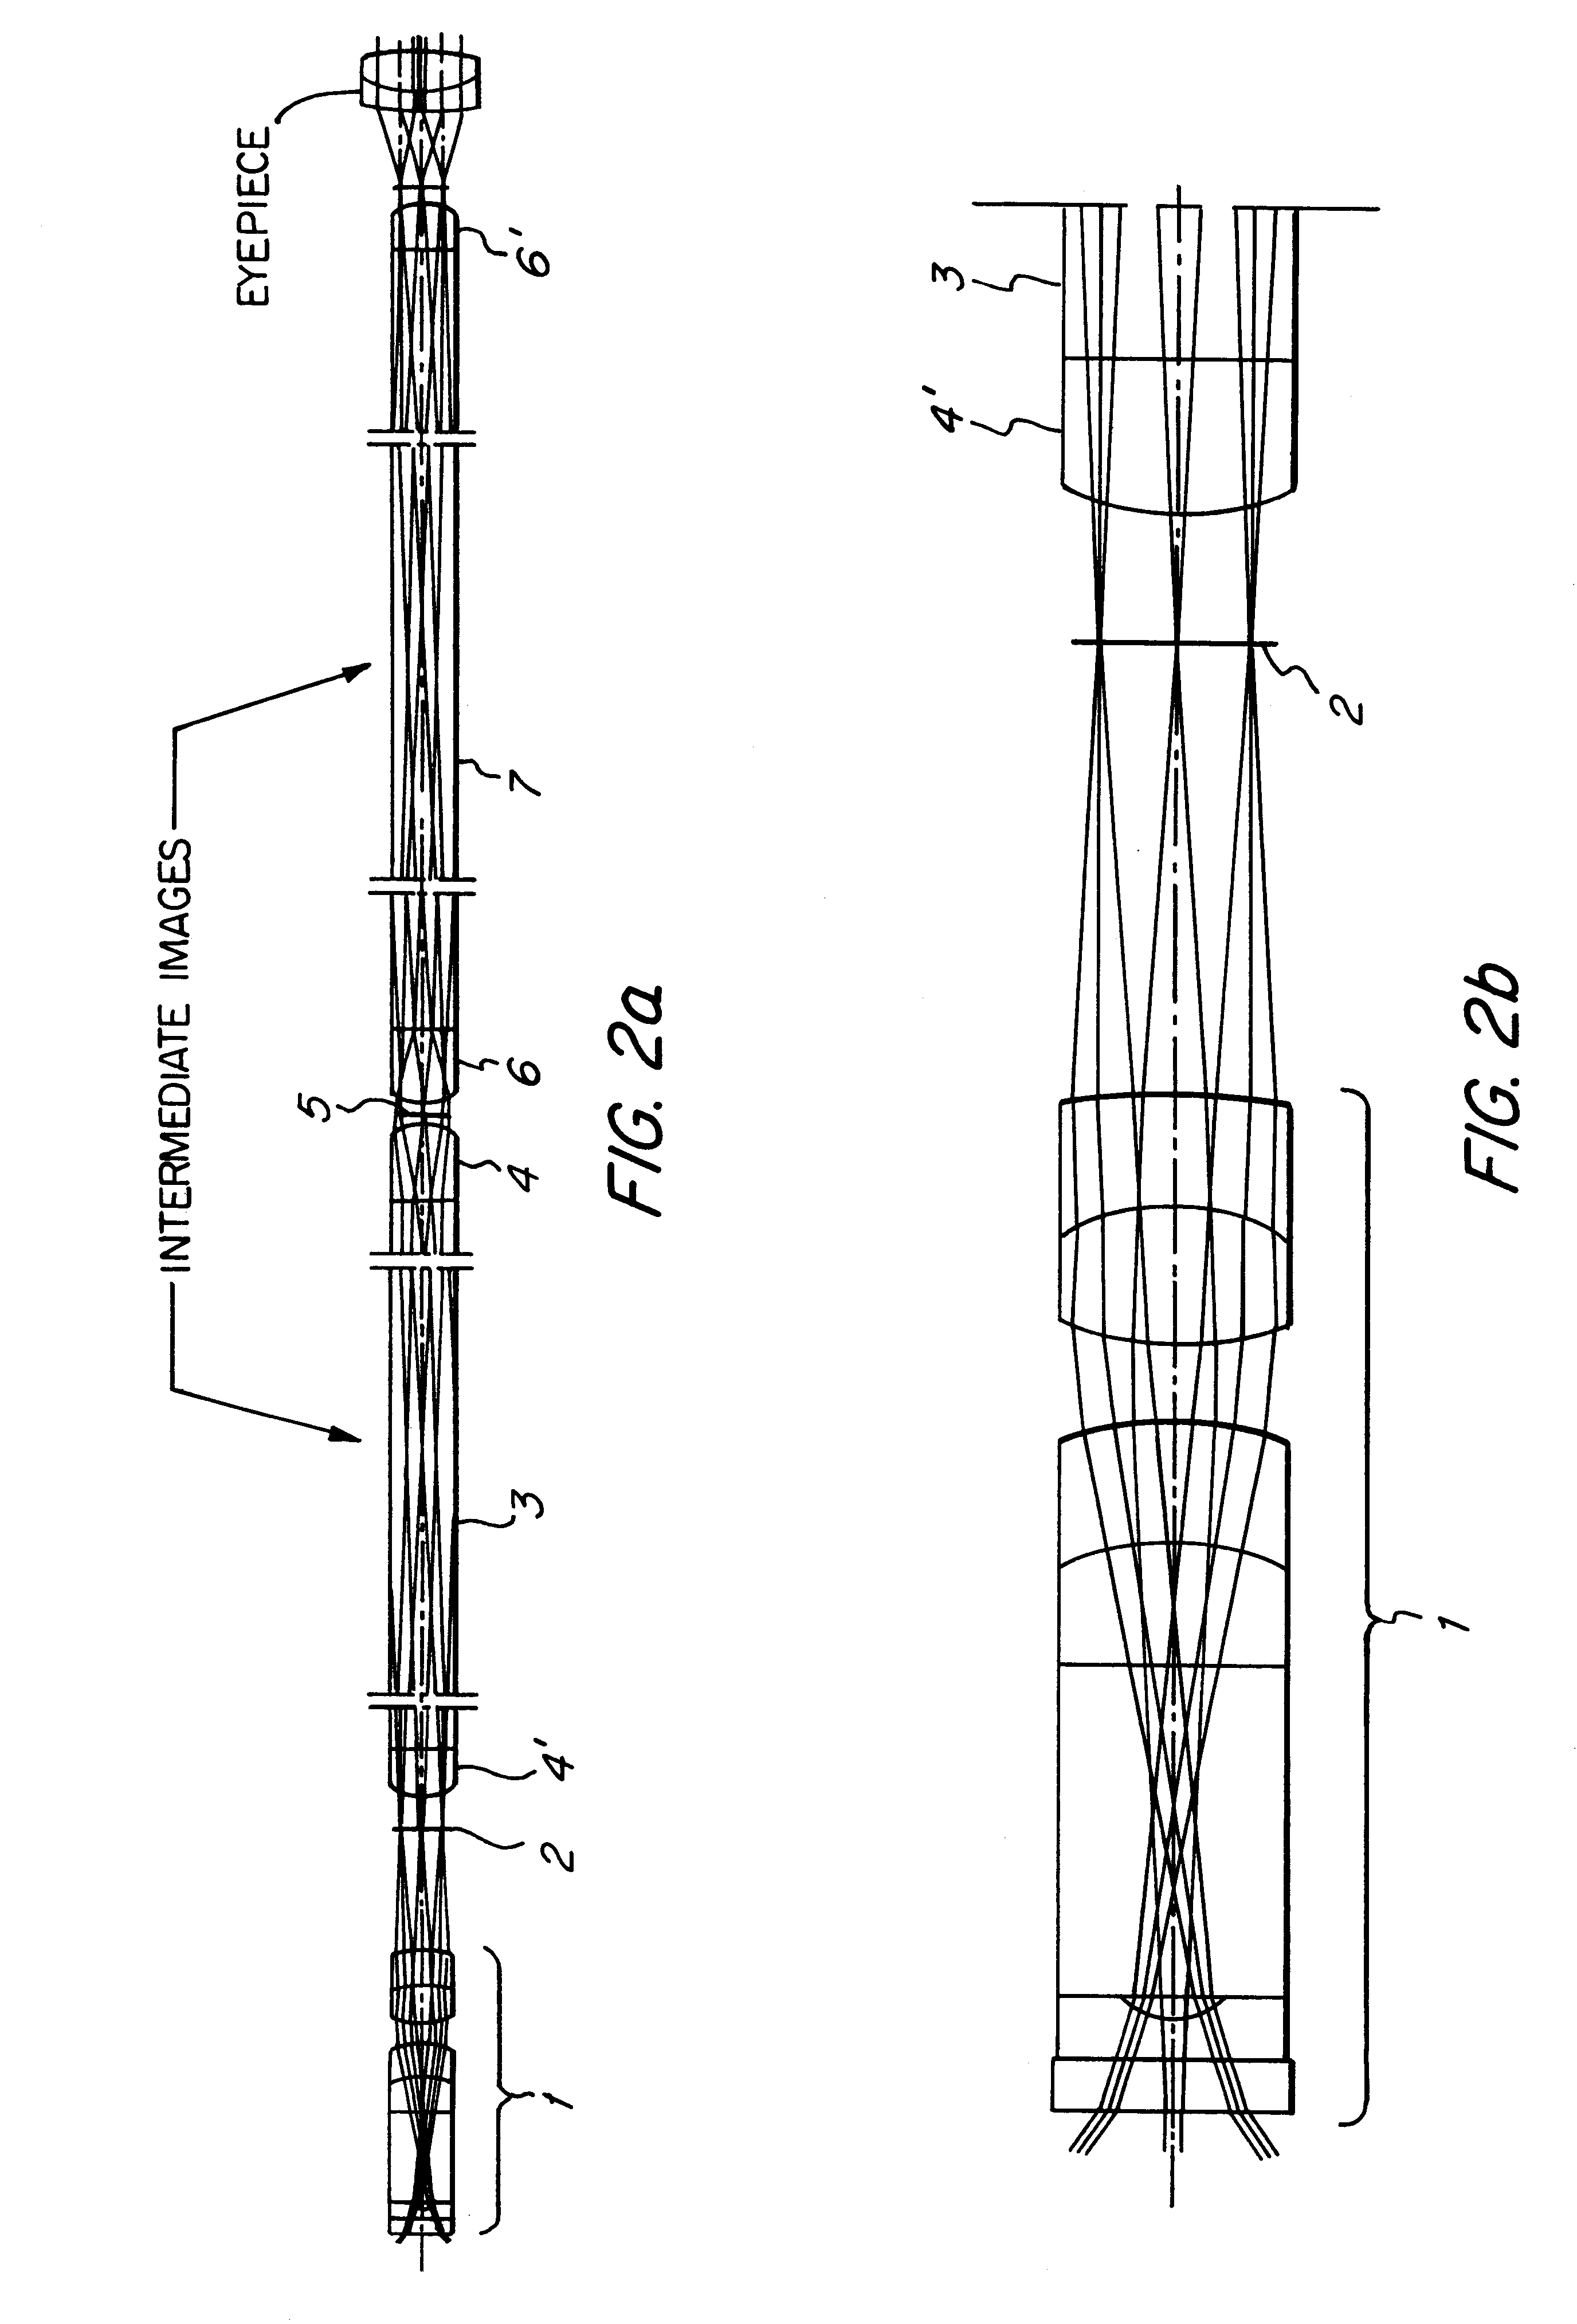 Endoscope with at least one reversal system with a non-homogeneous refraction index